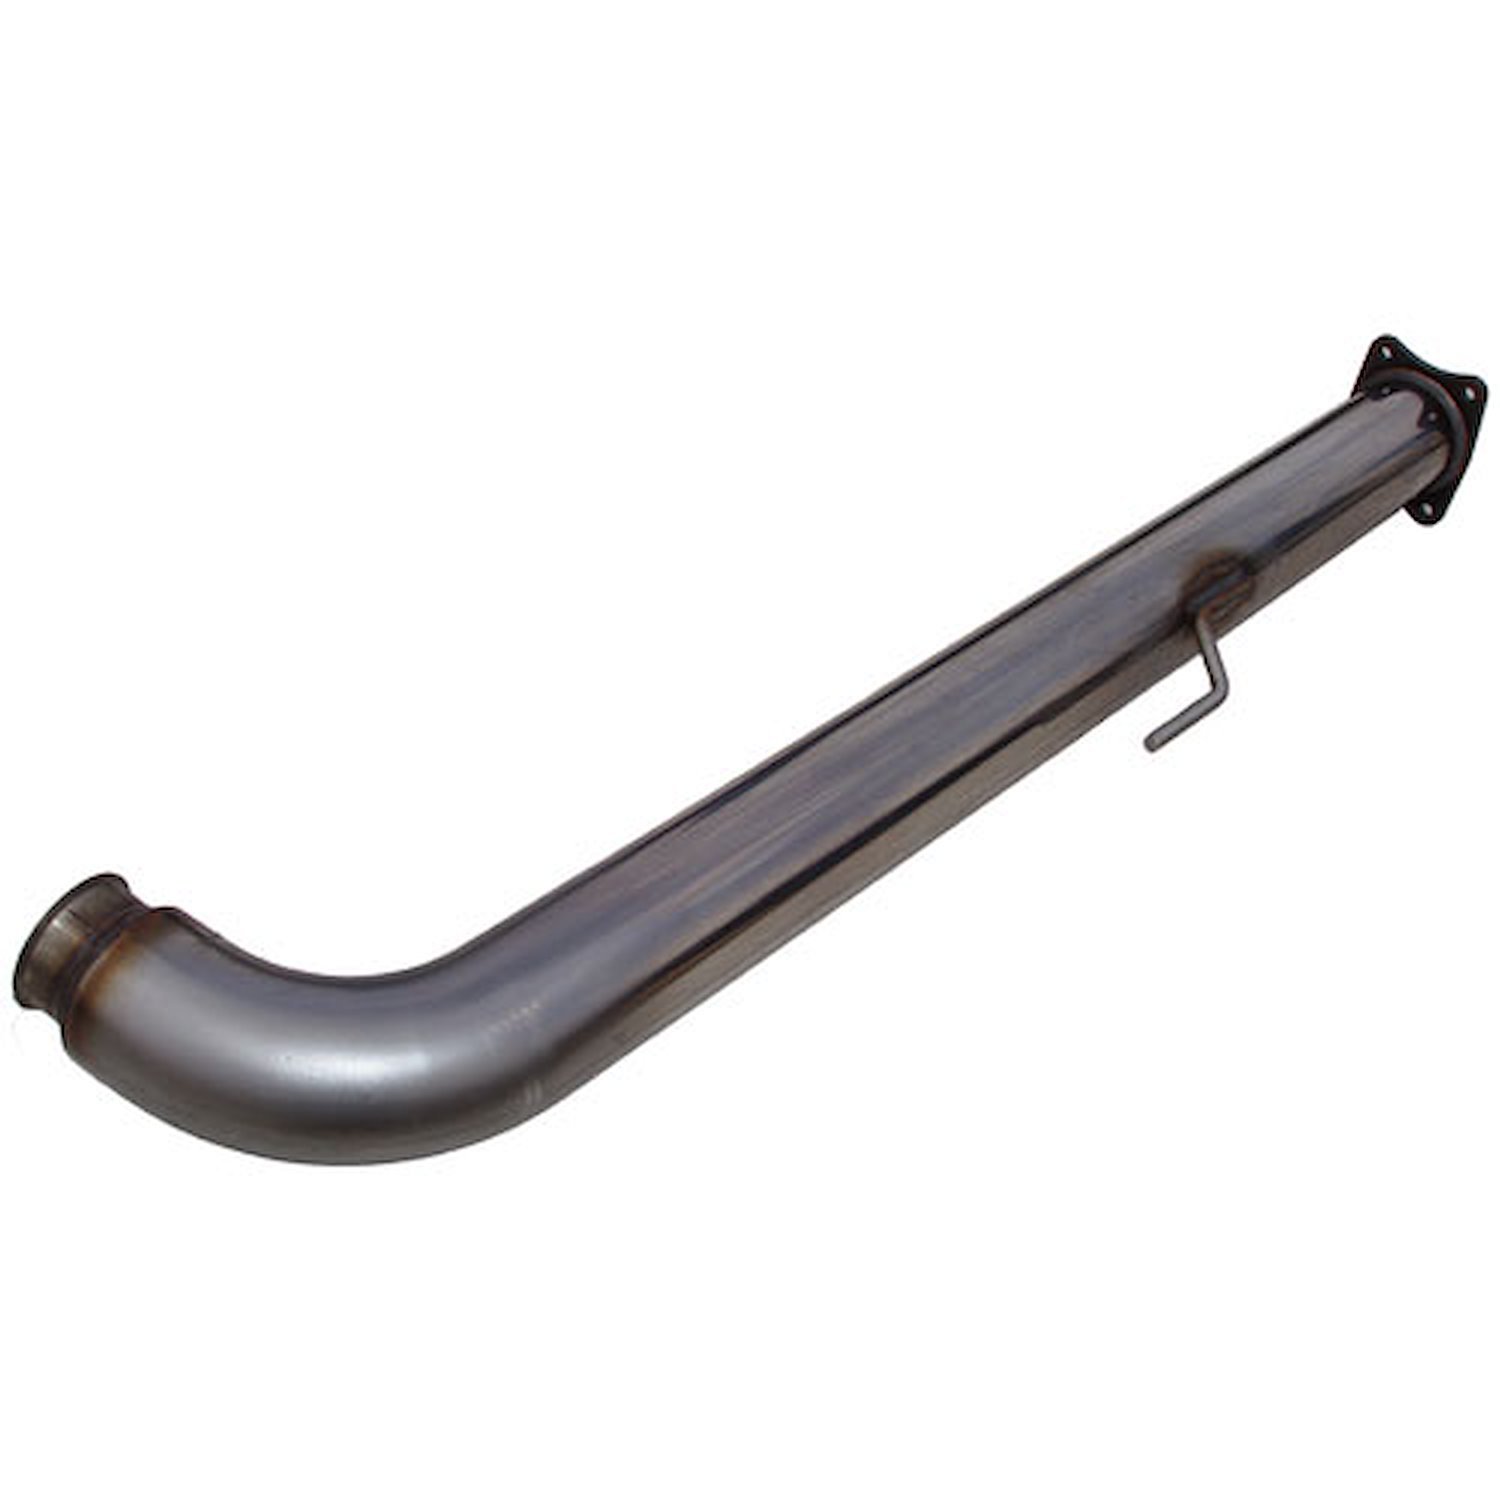 Downpipe Kit With Flange 2001-2005 GM Duramax 2500/3500